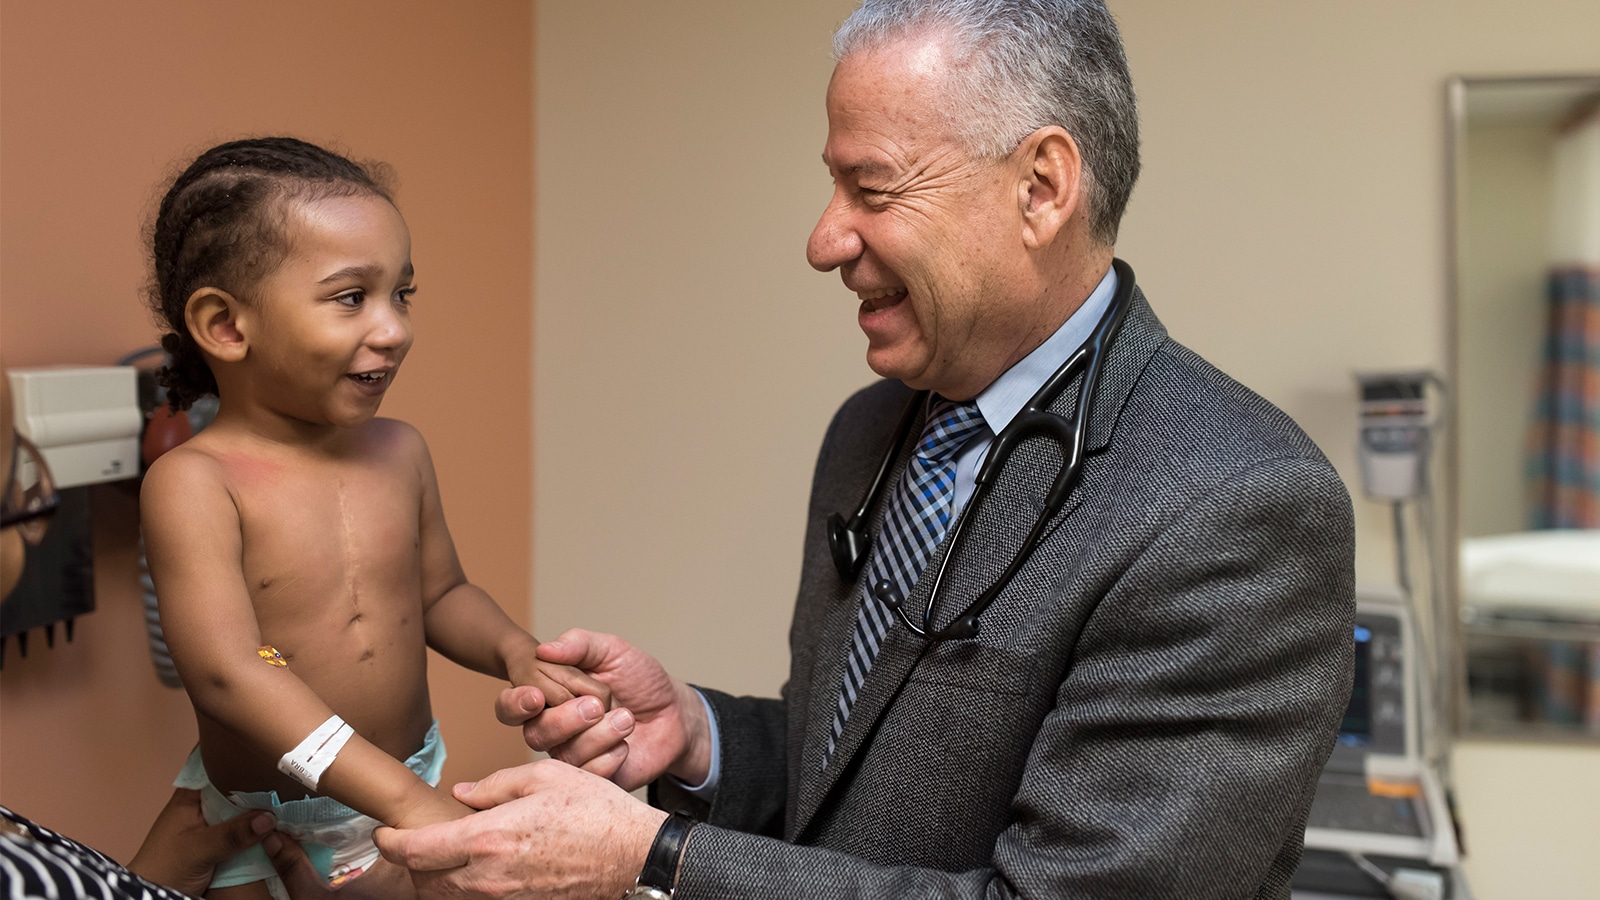 A doctor at NYU Langone providing care for a young boy. They are both looking at each other and smiling